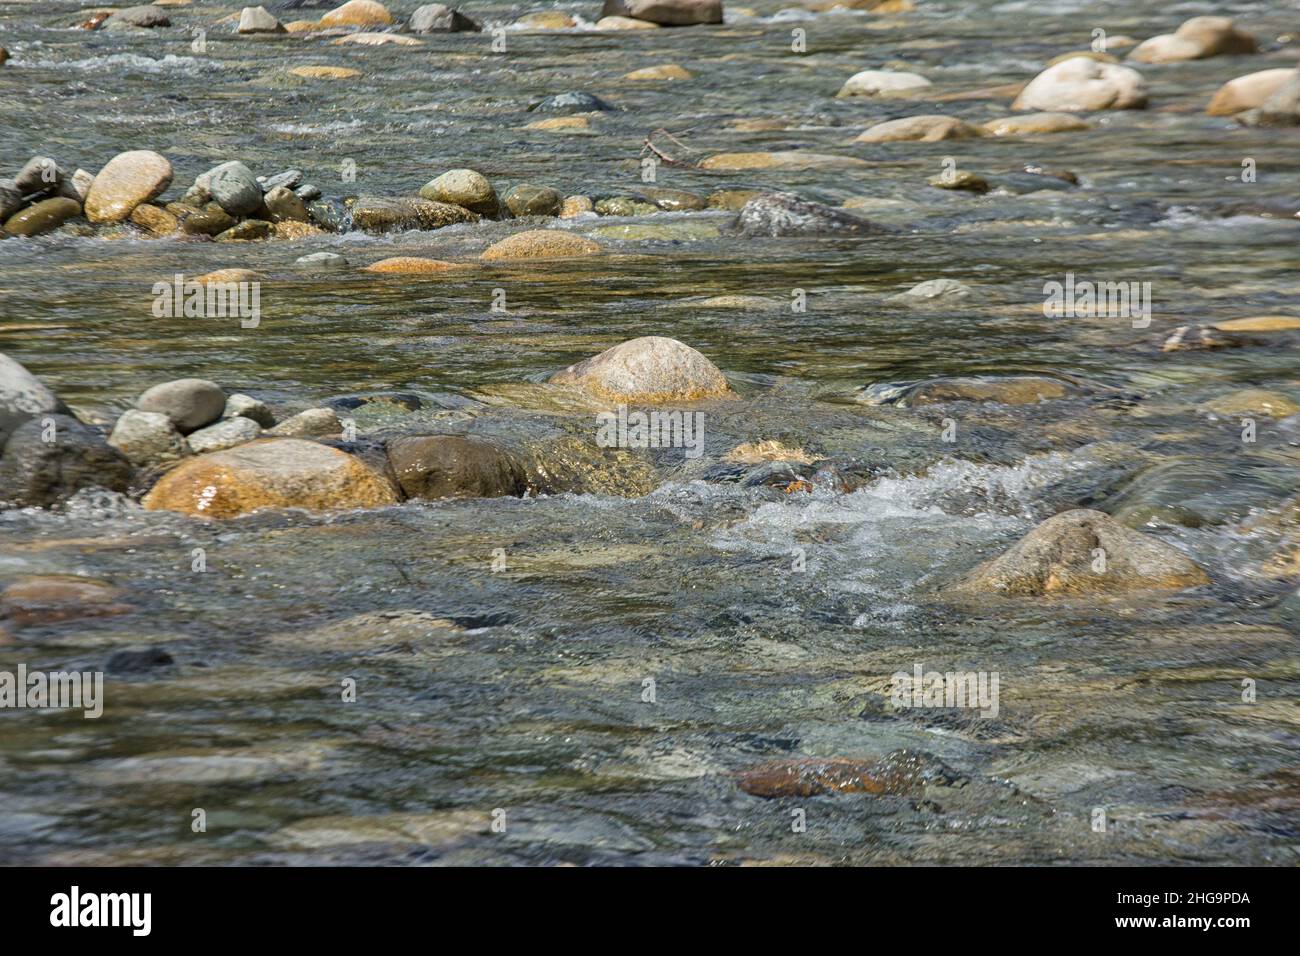 River with rocks in close up Stock Photo